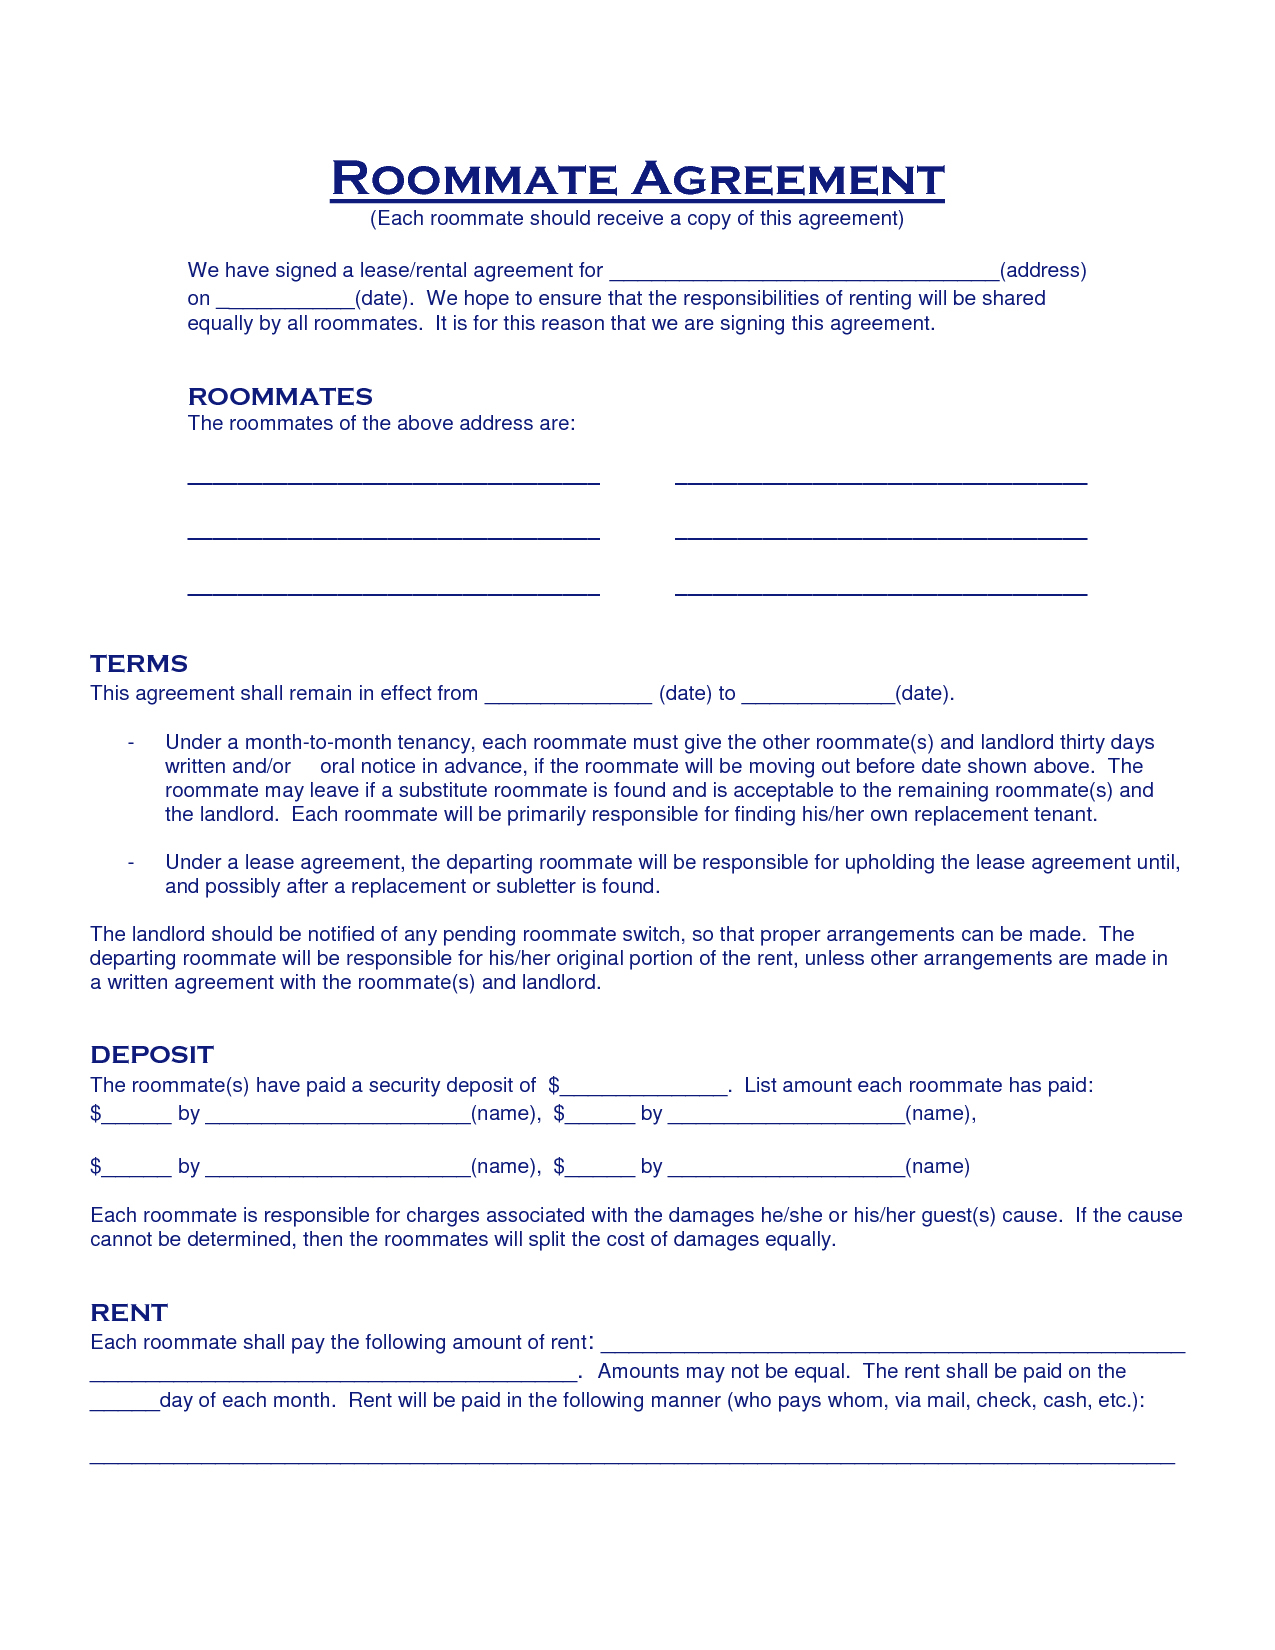 Roommate Agreement Template Word Housemate Agreement Template 98282 Roommate Agreement Template